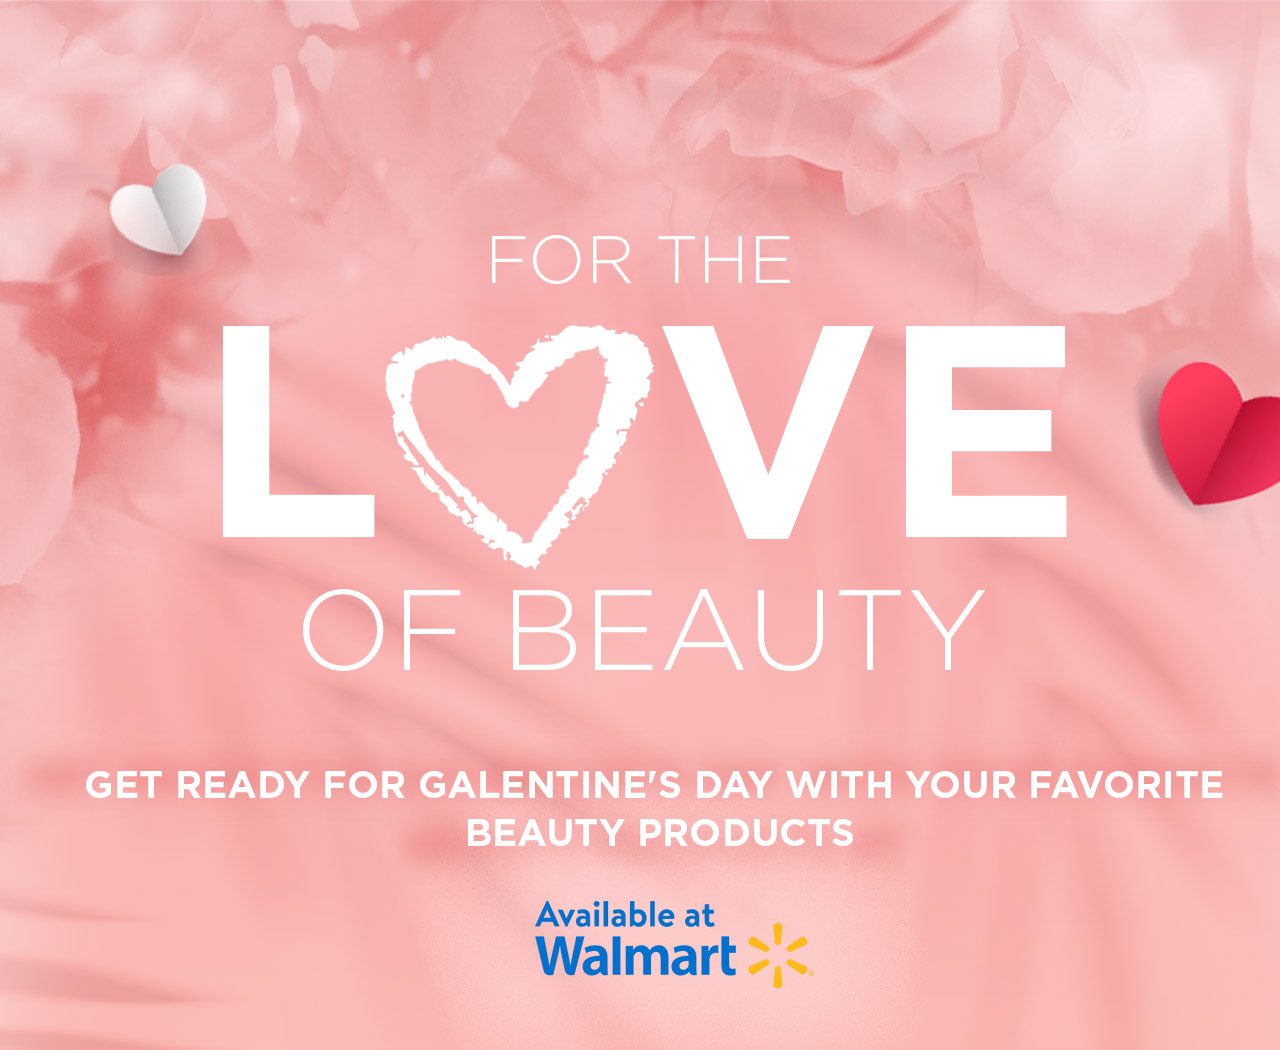 For the love of beauty - Get ready for Galentine's Day with your favorite beauty products